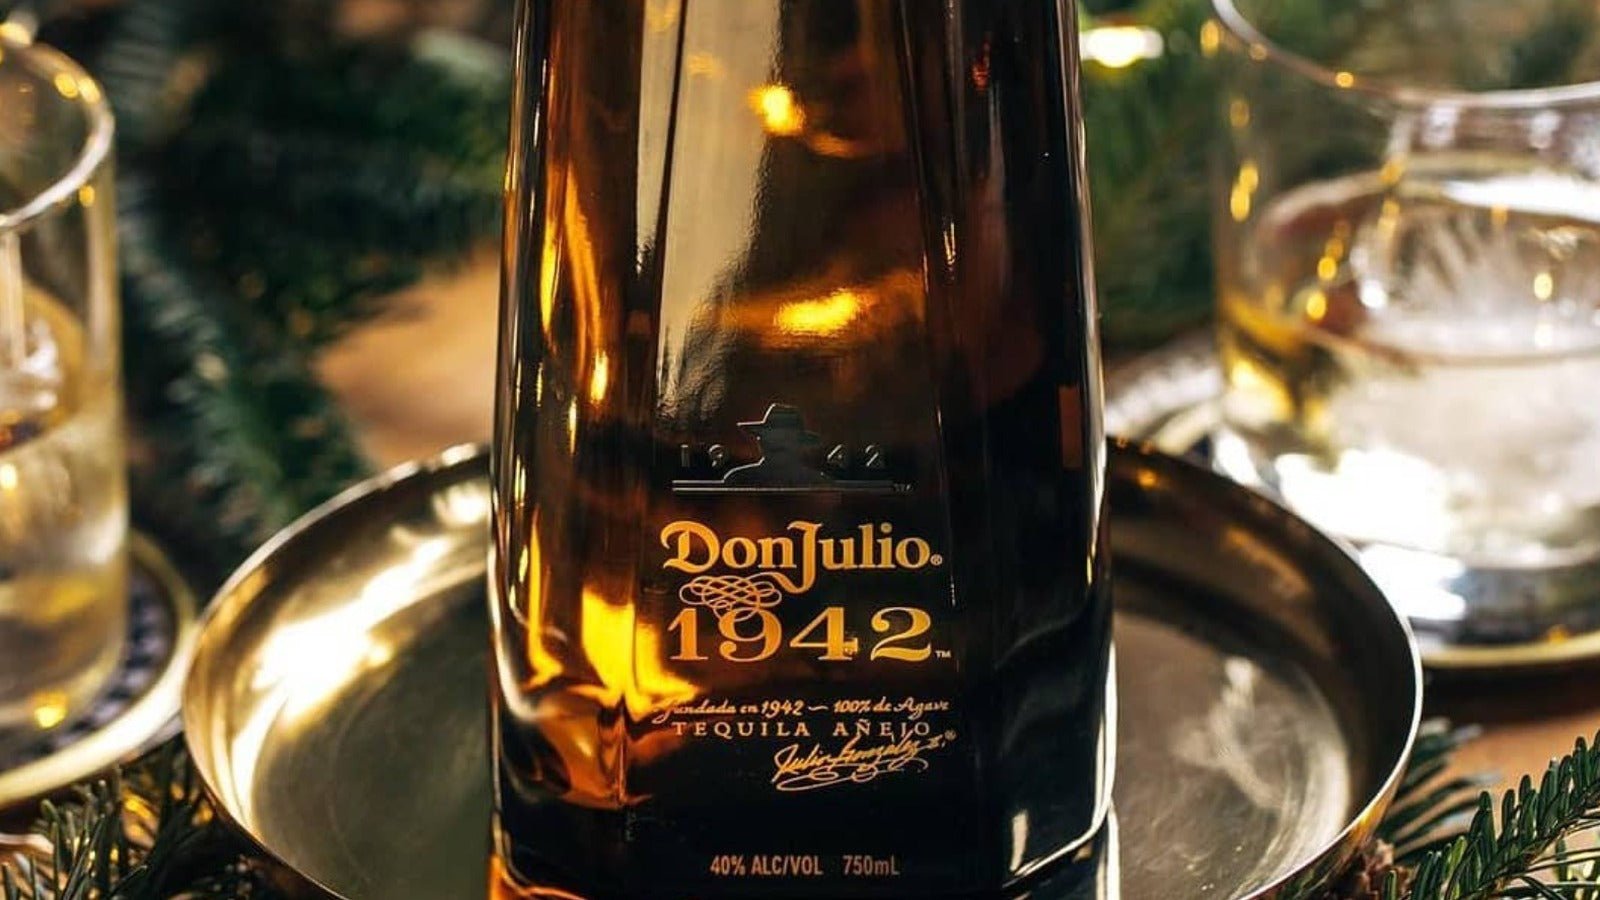 Tequila Don Julio 1942: A Premium Spirit That Embodies Tradition and Excellence